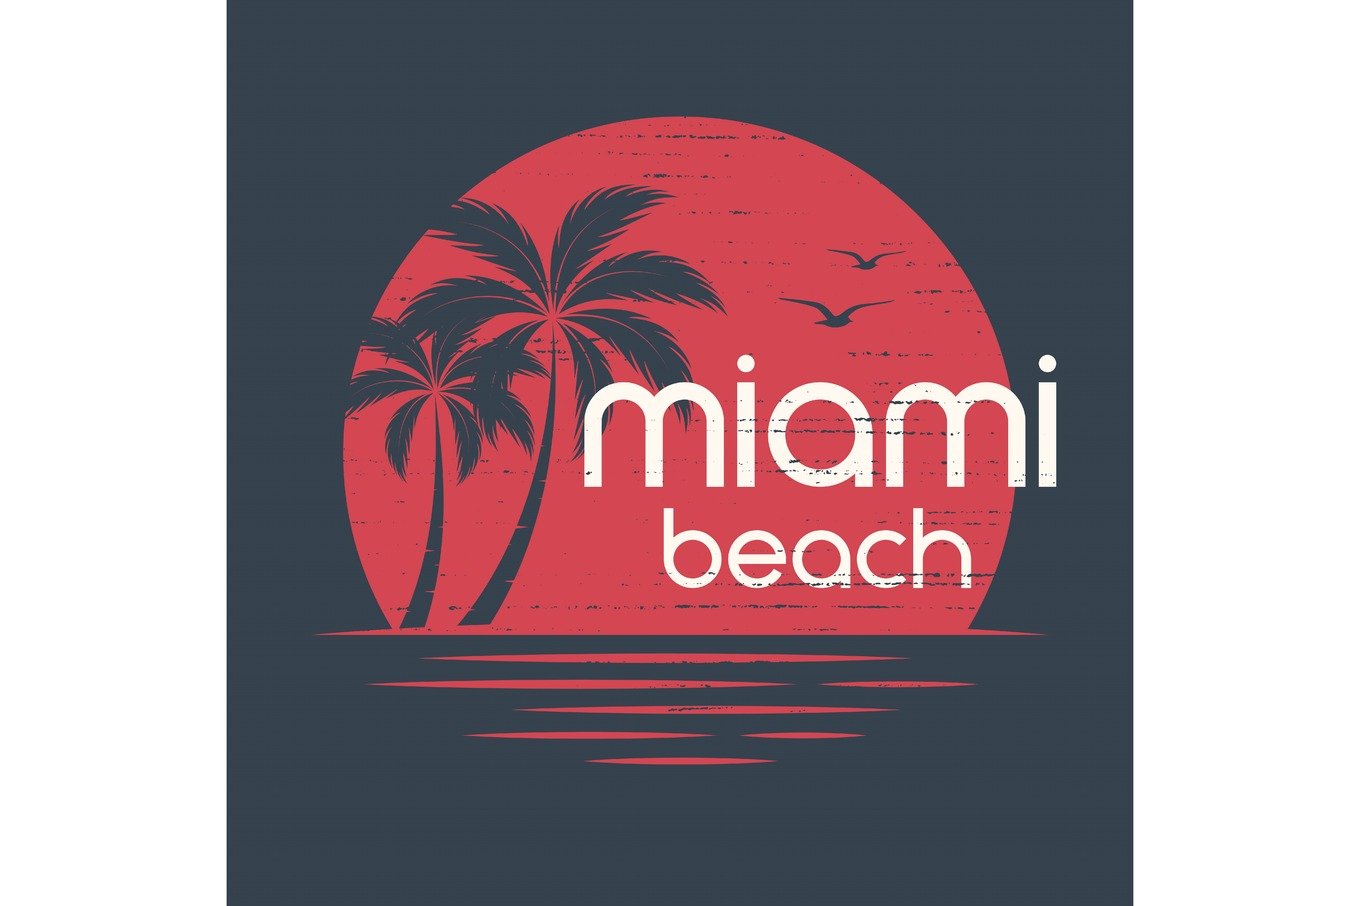 Miami sunset. T-shirt and apparel vector design, print, typograp cover image.